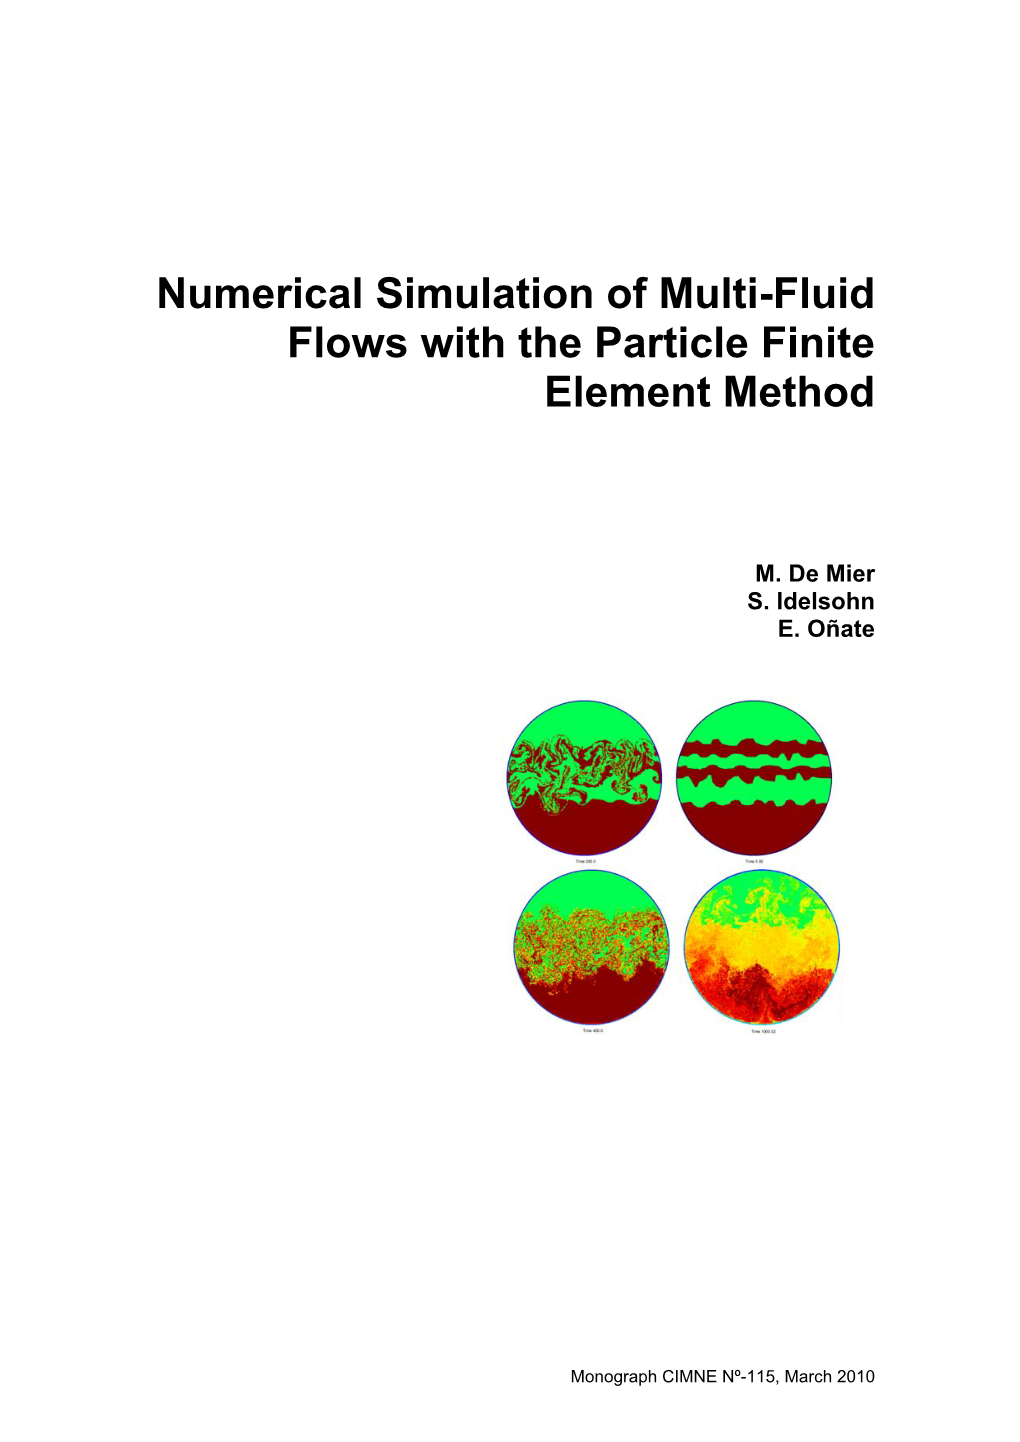 Numerical Simulation of Multi-Fluid Flows with the Particle Finite Element Method